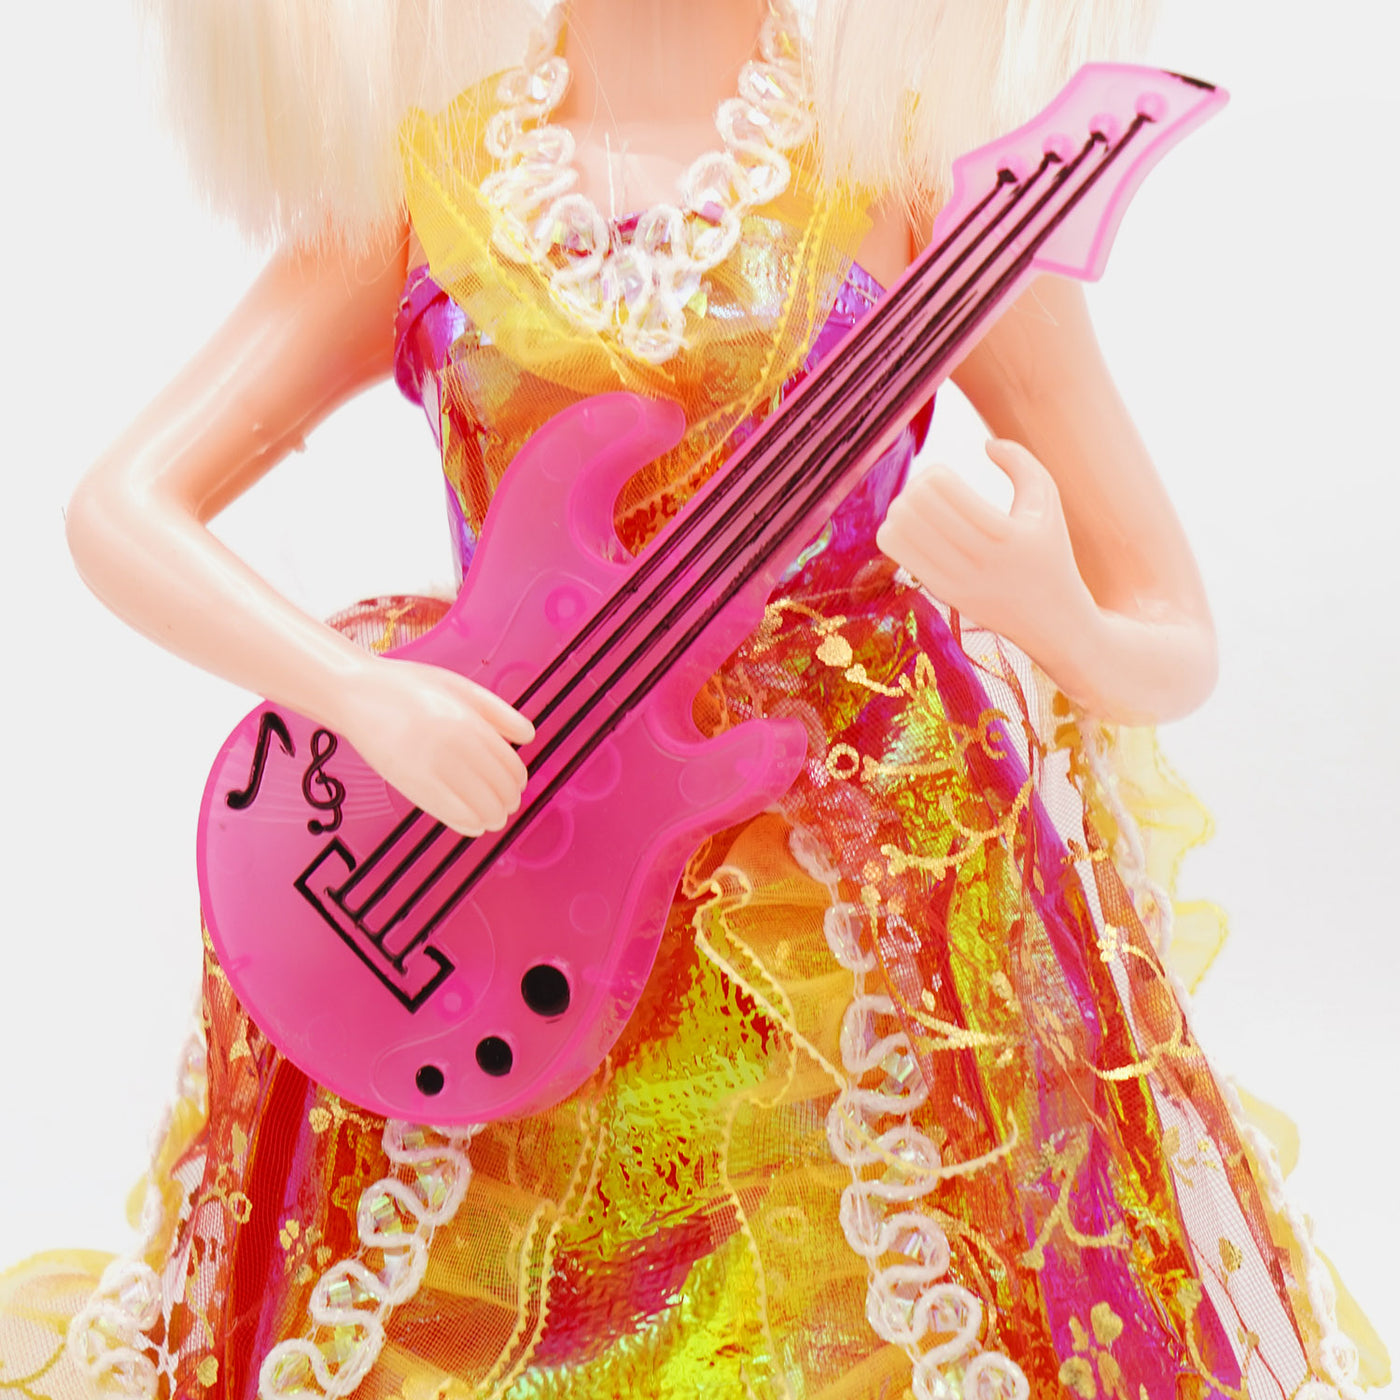 Guitar Doll Toy With Music For Kids